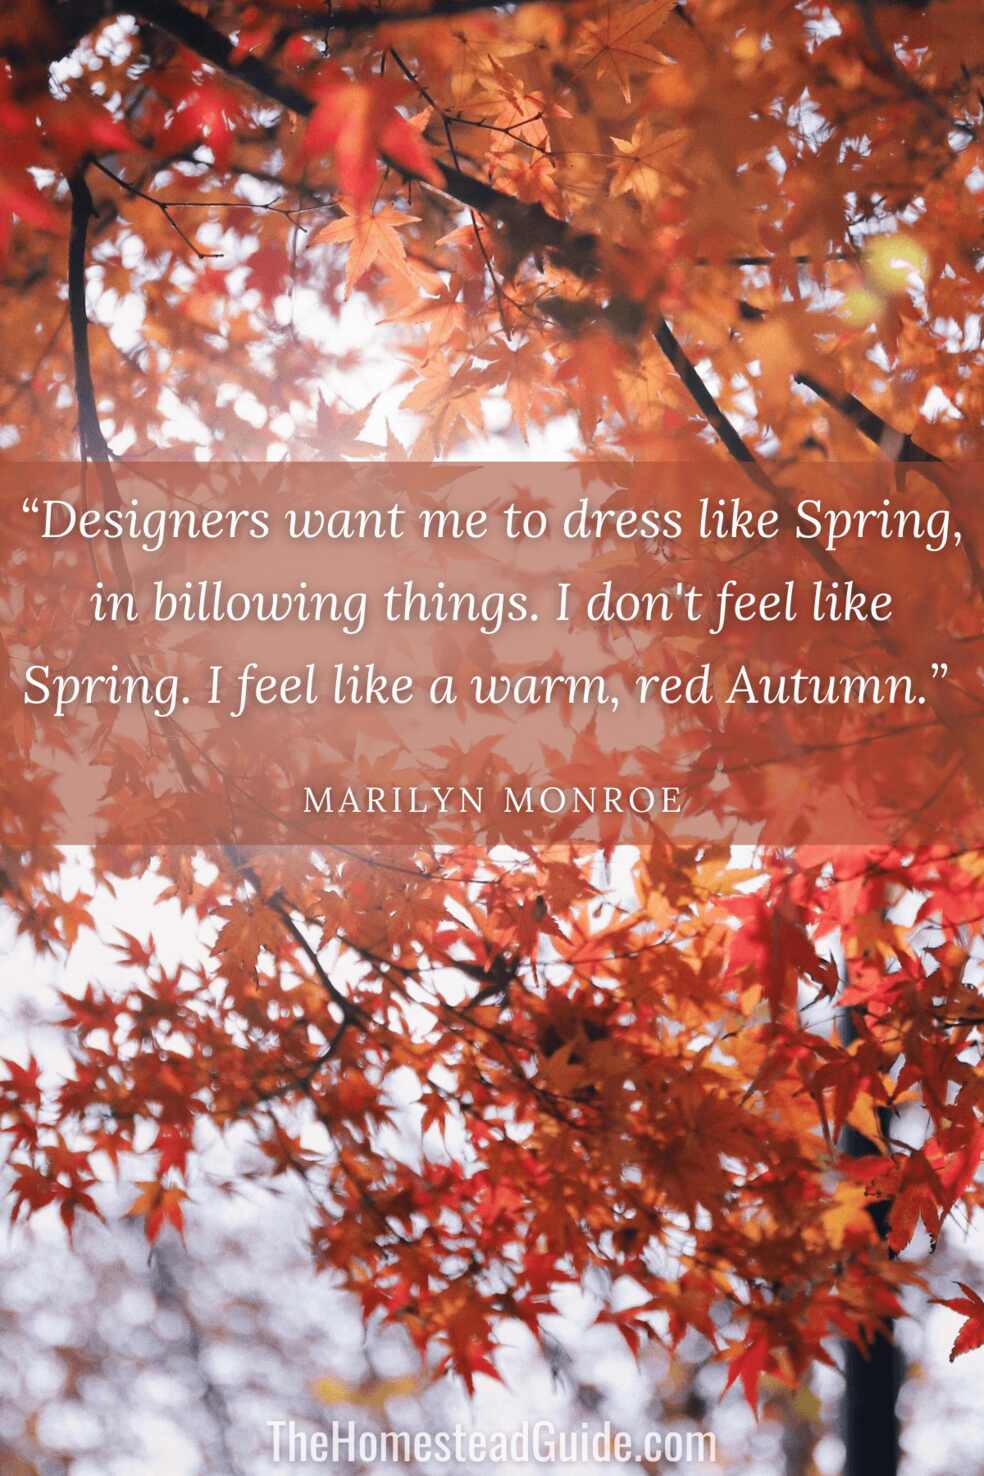 Designers want me to dress like Spring, in billowing things. I don't feel like Spring. I feel like a warm red Autumn.